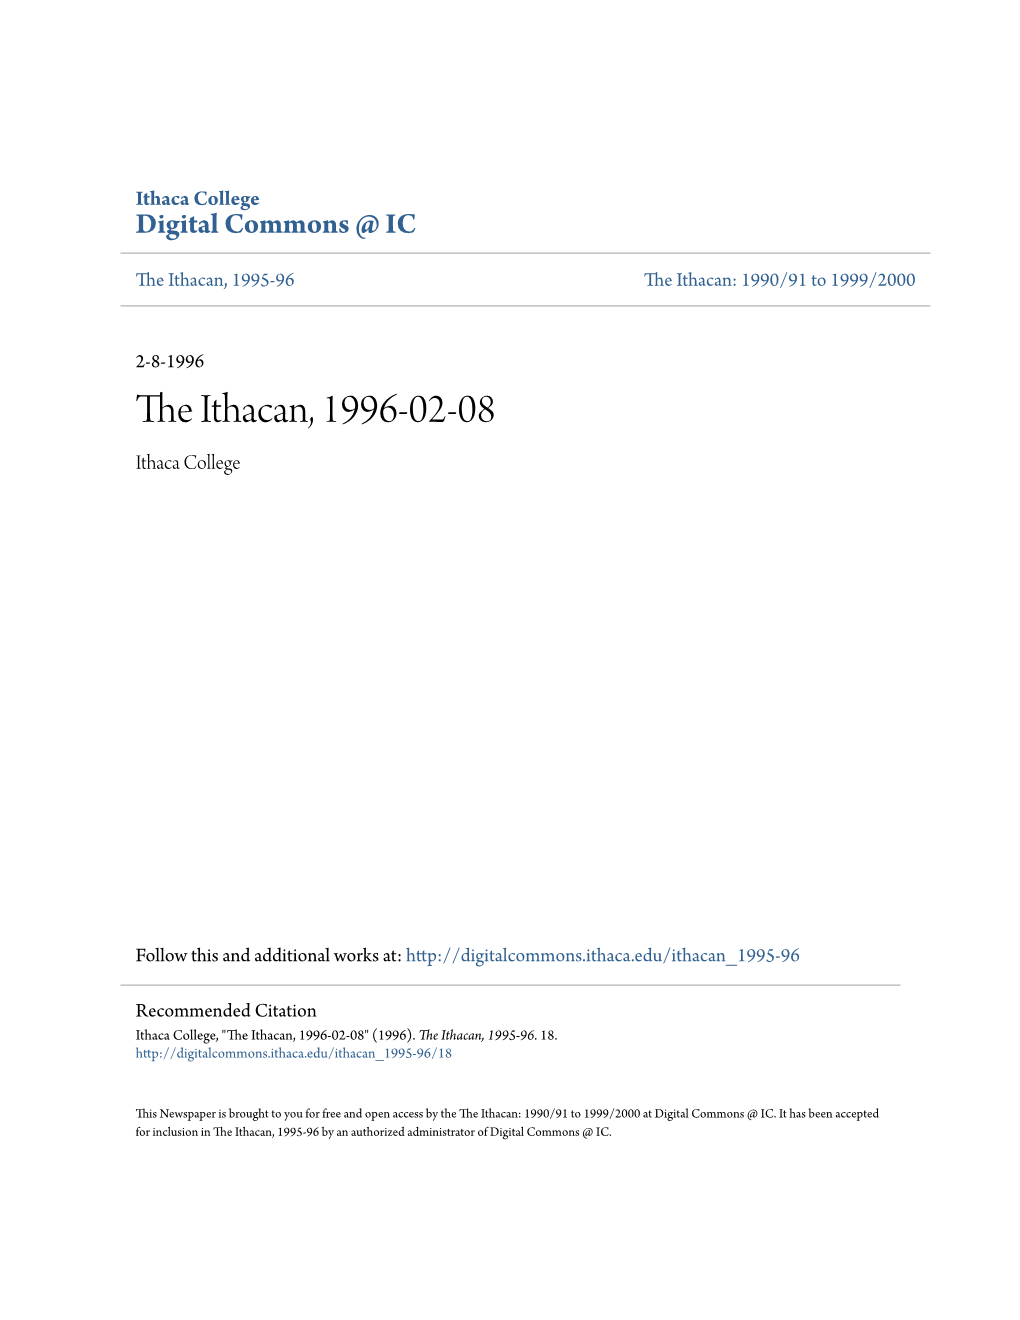 The Ithacan, 1996-02-08